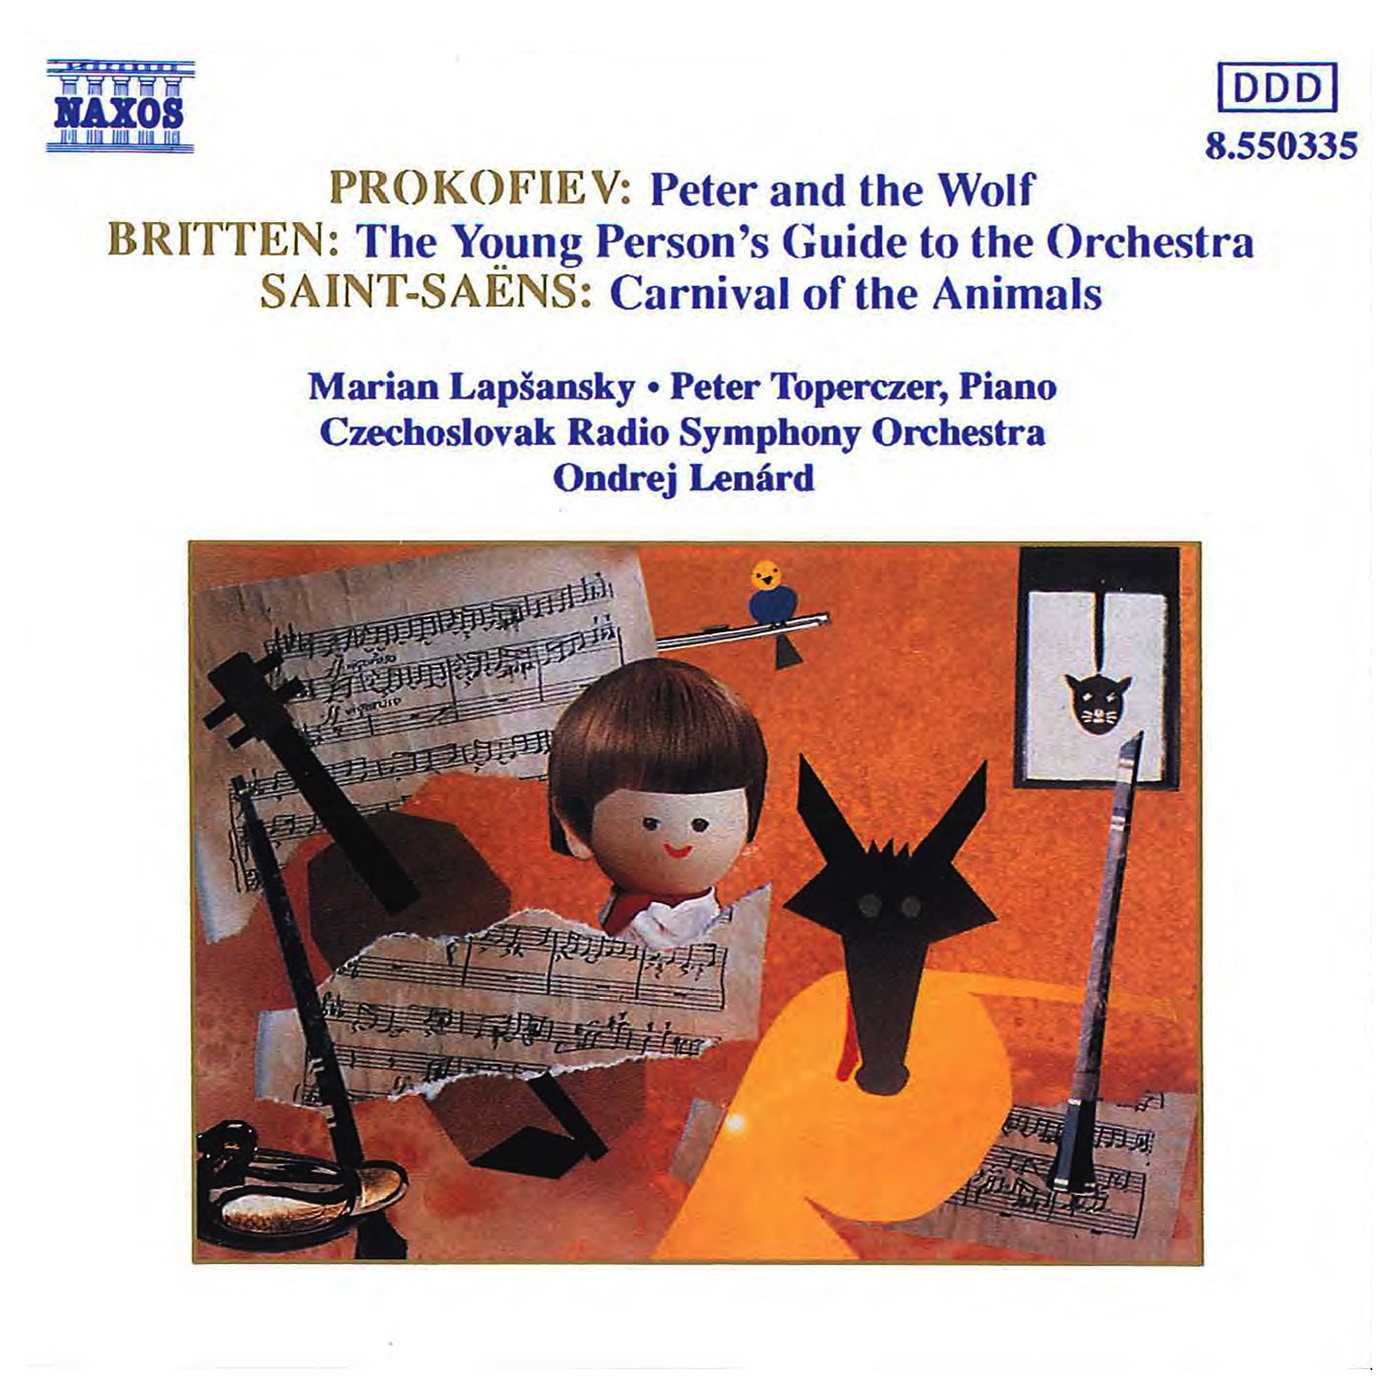 The Young Person's Guide to the Orchestra: Variations and Fugue on a Theme of Henry Purcell, Op. 34:Theme